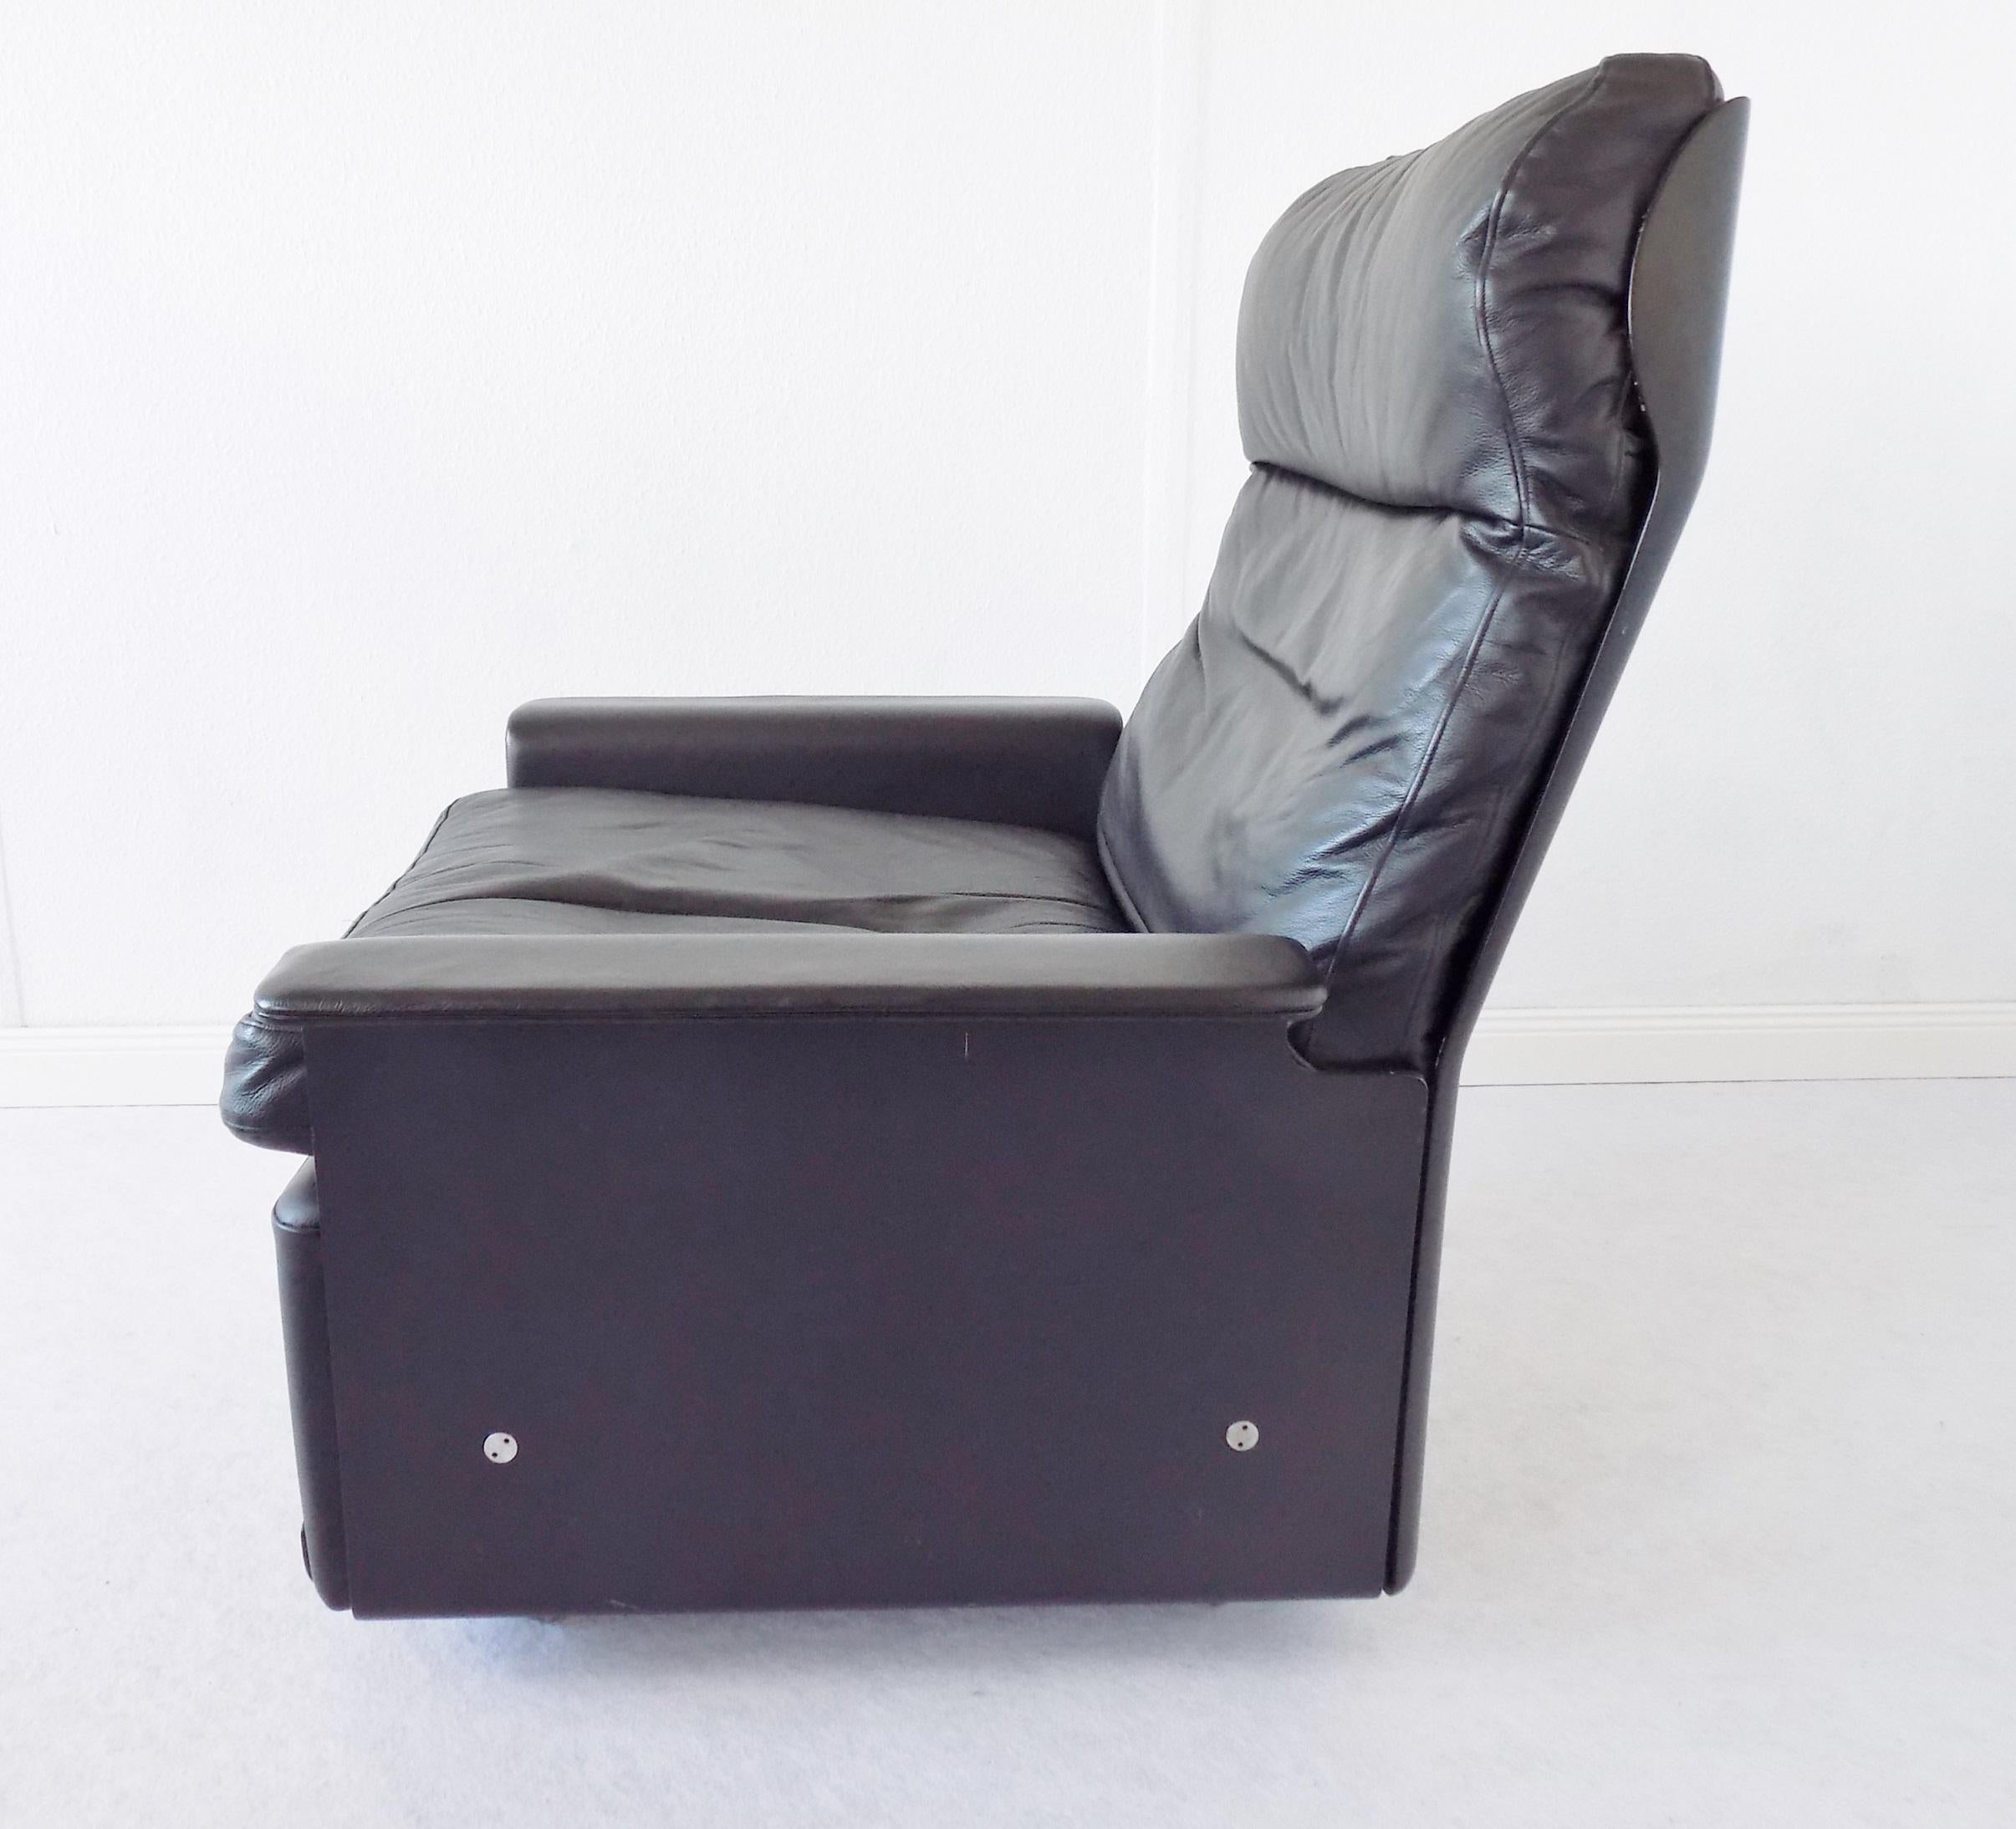 Vitsoe 620 by Dieter Rams Black Leather Lounge chair, Mid-Century modern, German

Very fine example of a Vitsoe 620. This chair in black/black is in very good condition. It got new leather recently, the fiberglass frame is in excellent shape. It